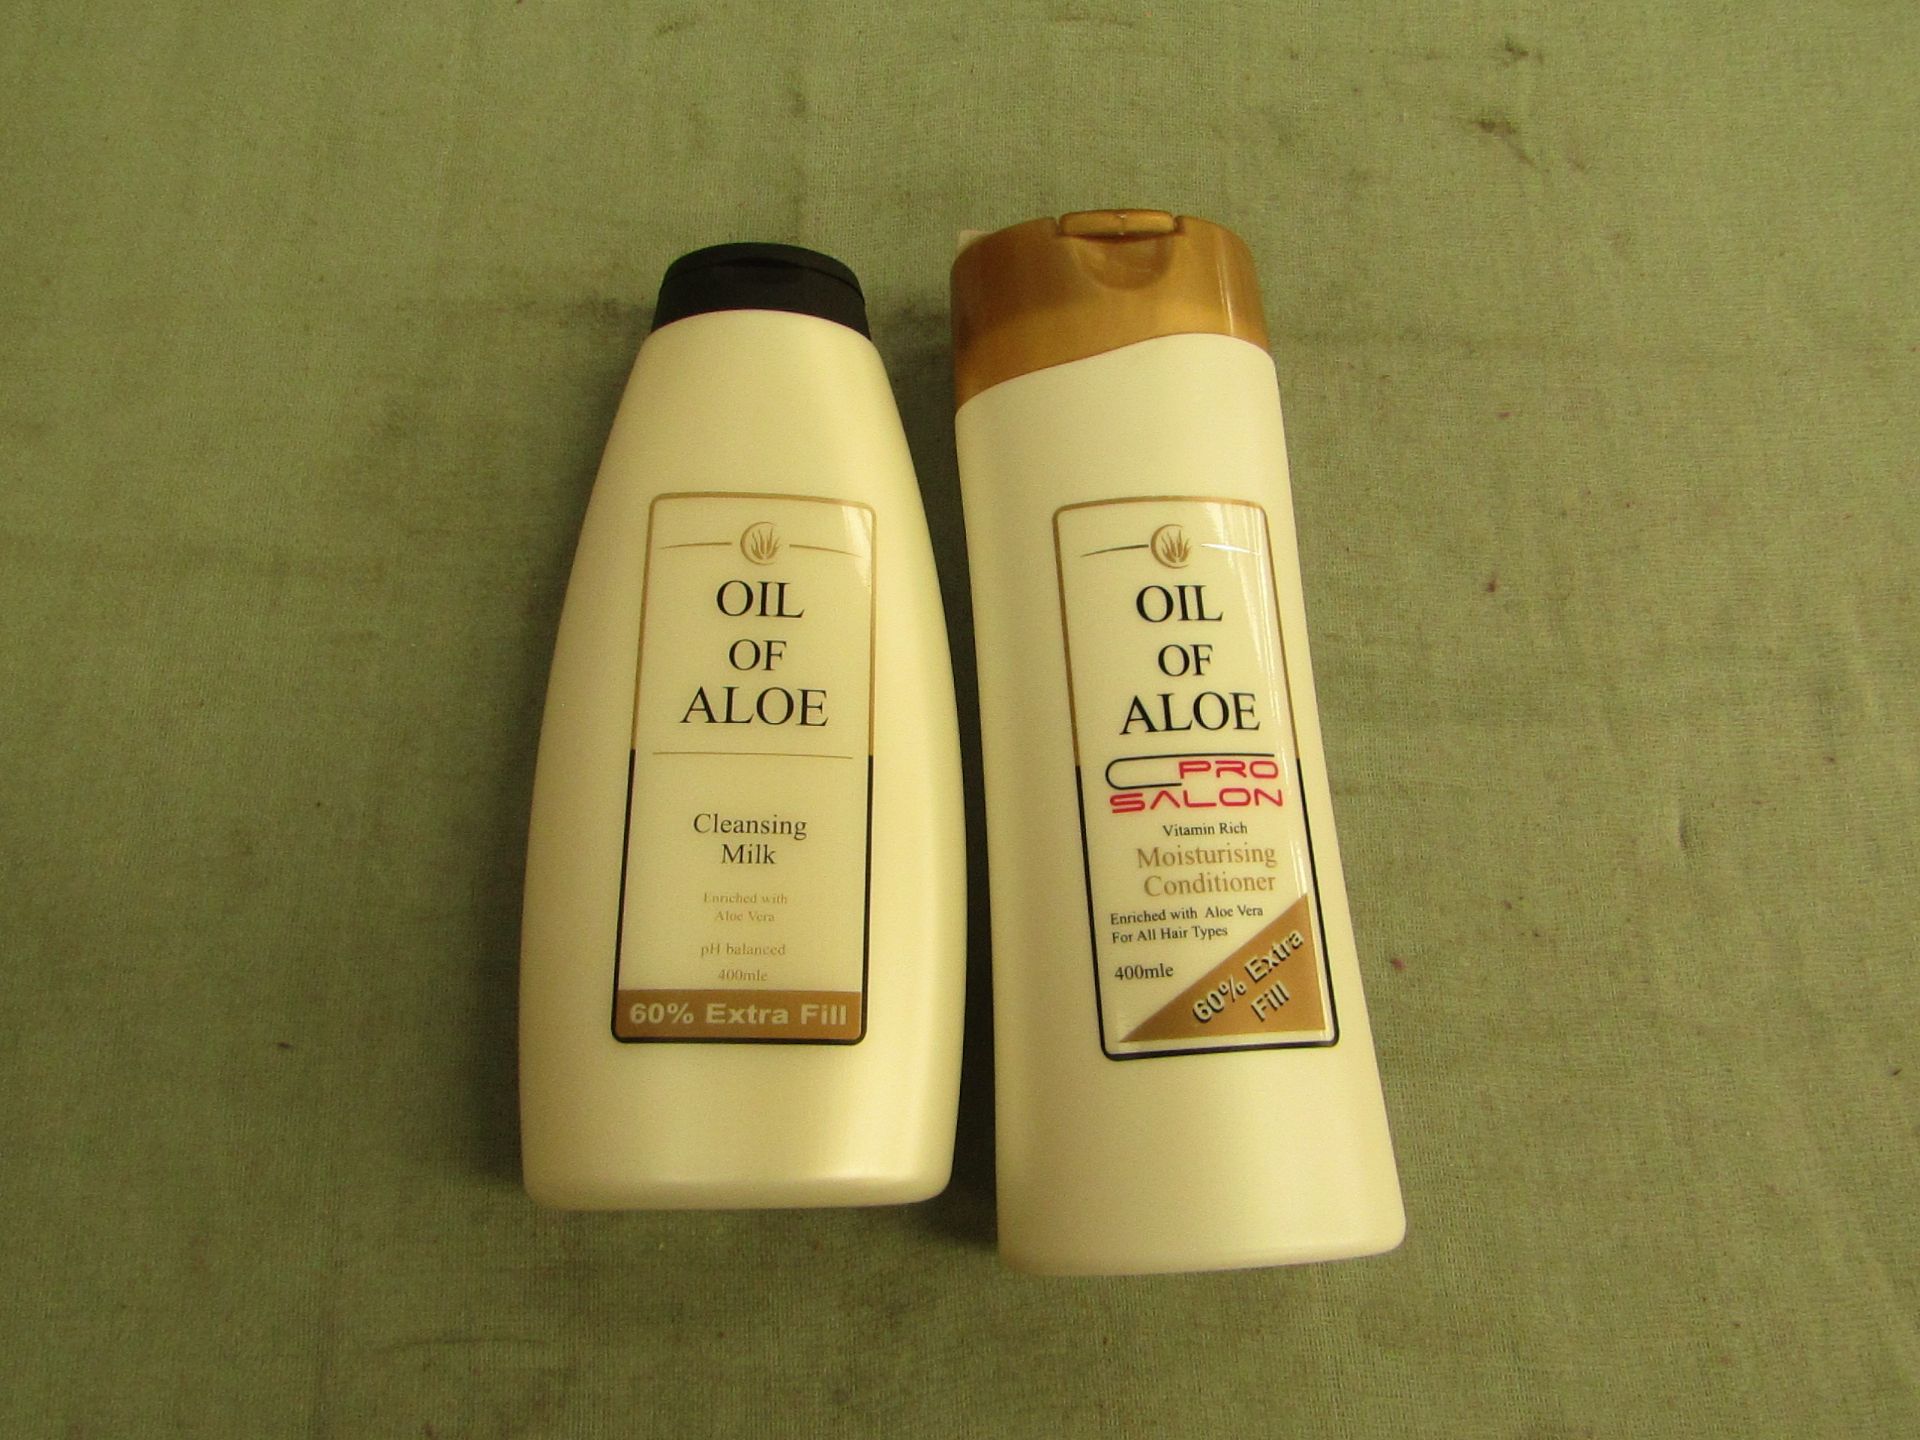 1x OIL OF ALOE - Cleansing Milk Enriched With Aloe Vera - 400ml - New. 1x OIL OF ALOE - Pro Salon